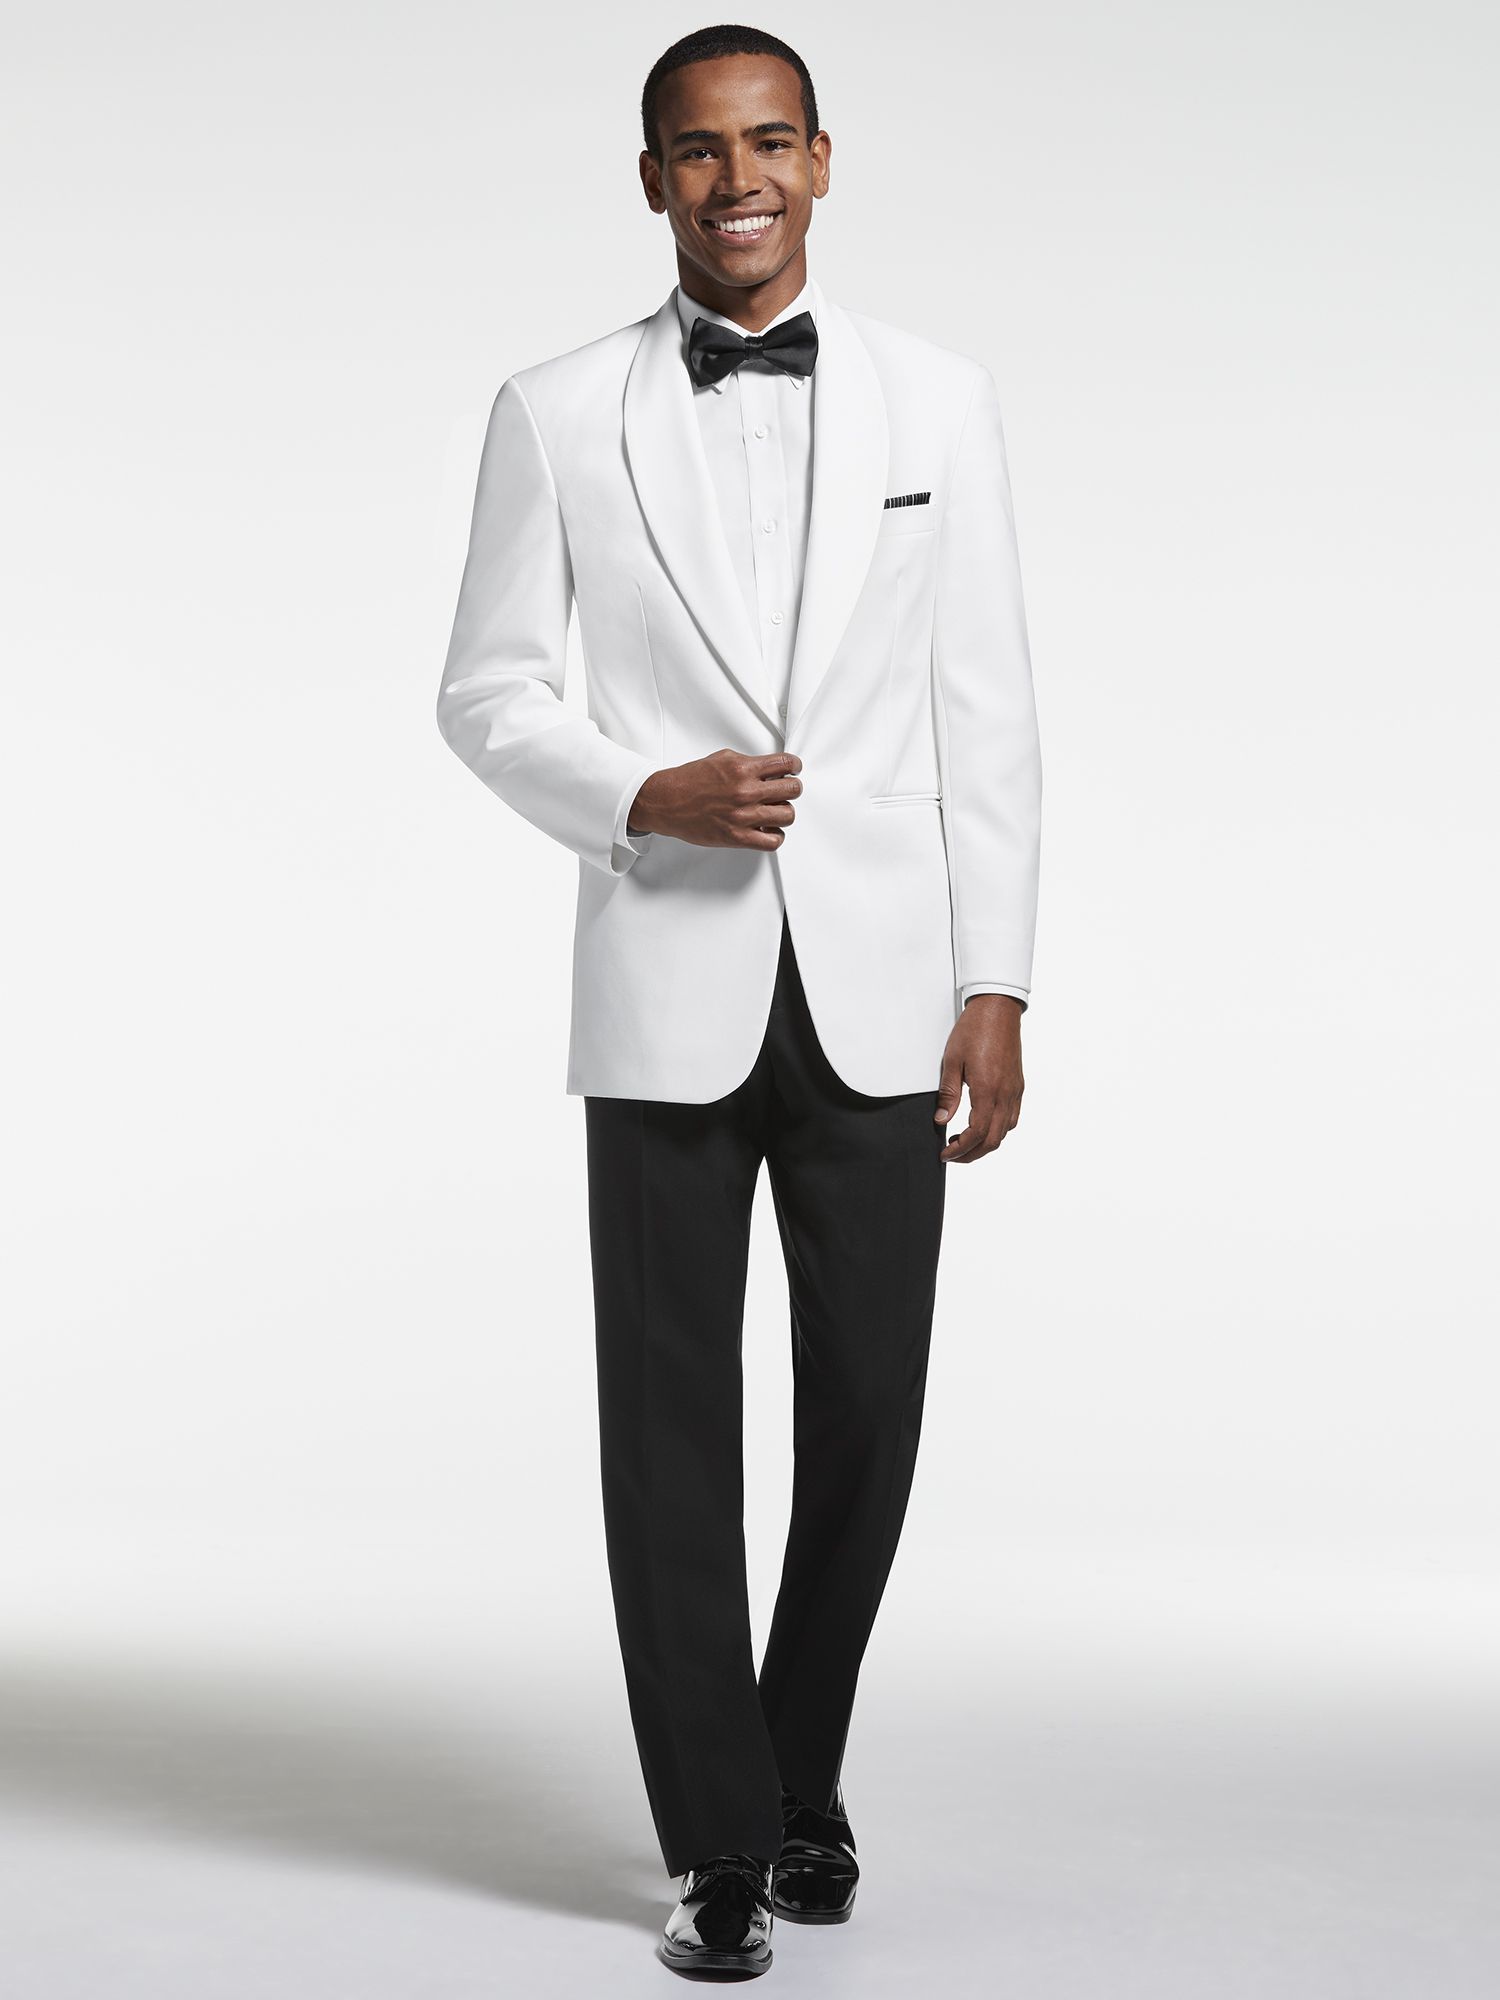 What To Wear To Graduation Guest Male - change comin